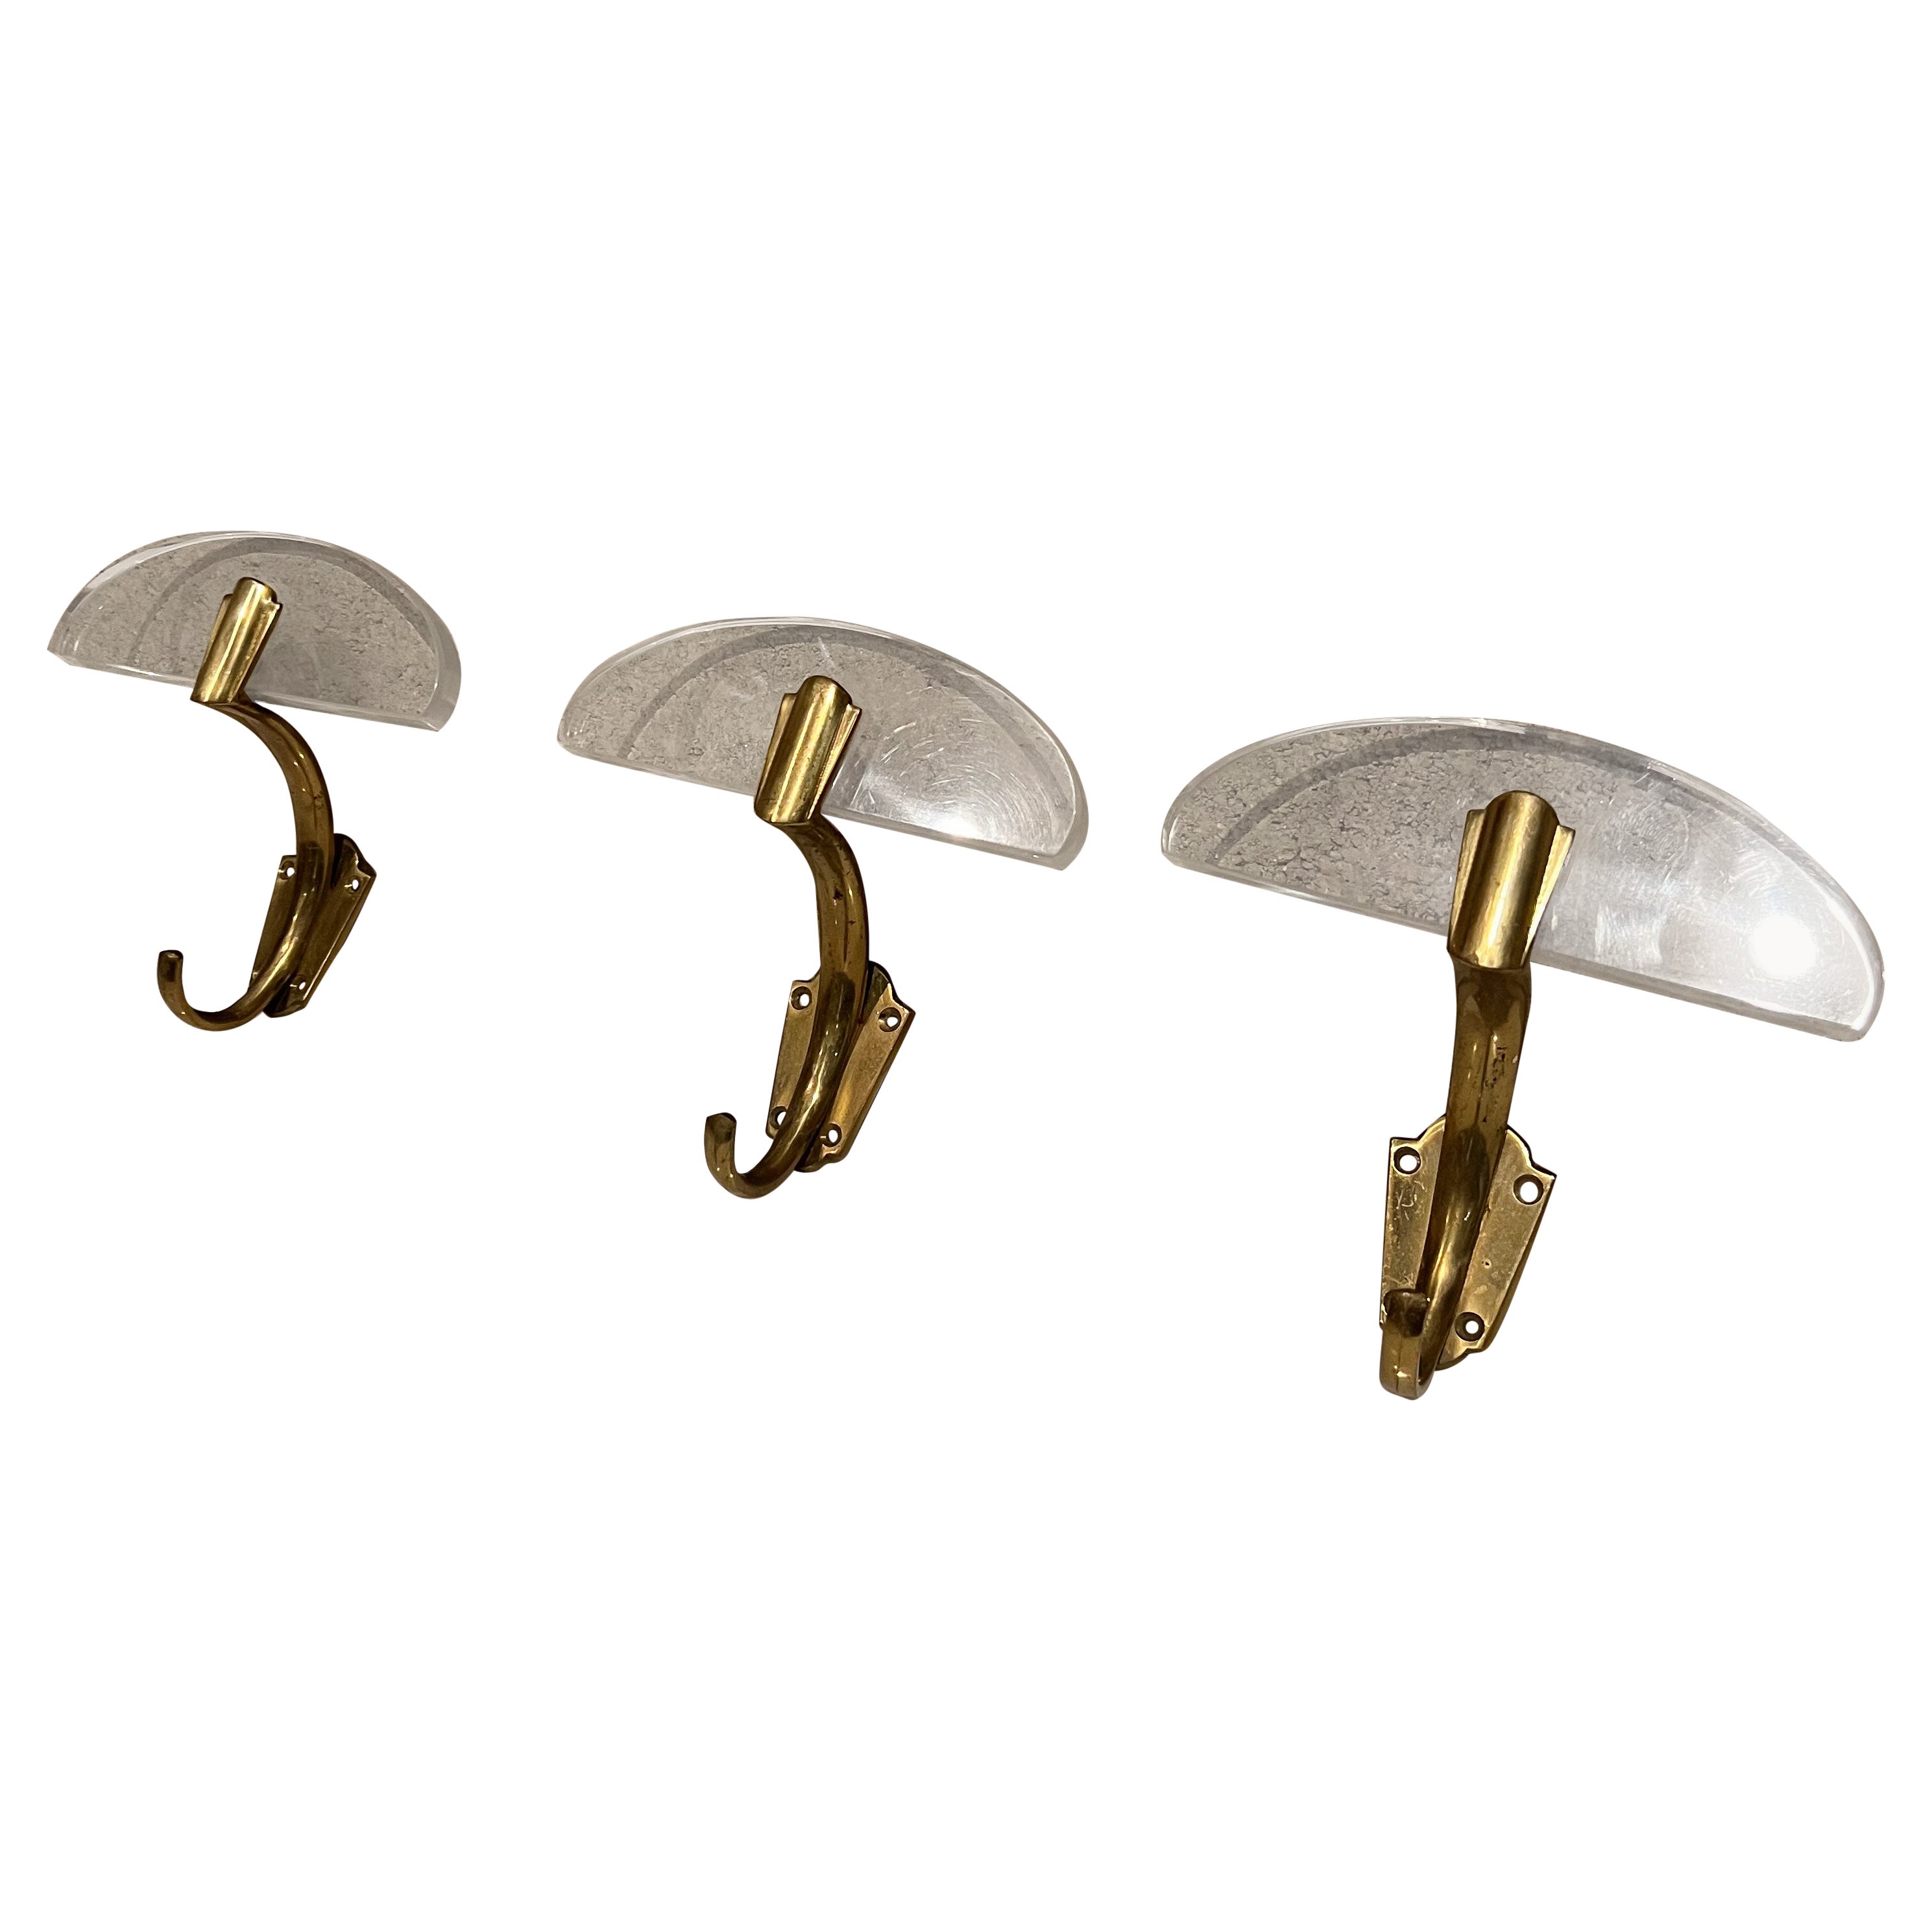 Italian wall hooks
From Italy1950s set of 3 valet wall hooks style of Fontana Arte.
Unmarked
Lucite and Bronze
 Measures: 5.25 tall x 5.63 wide x 2.25 deep
Original vintage preowned unrestored condition.
Please refer to images provided.


